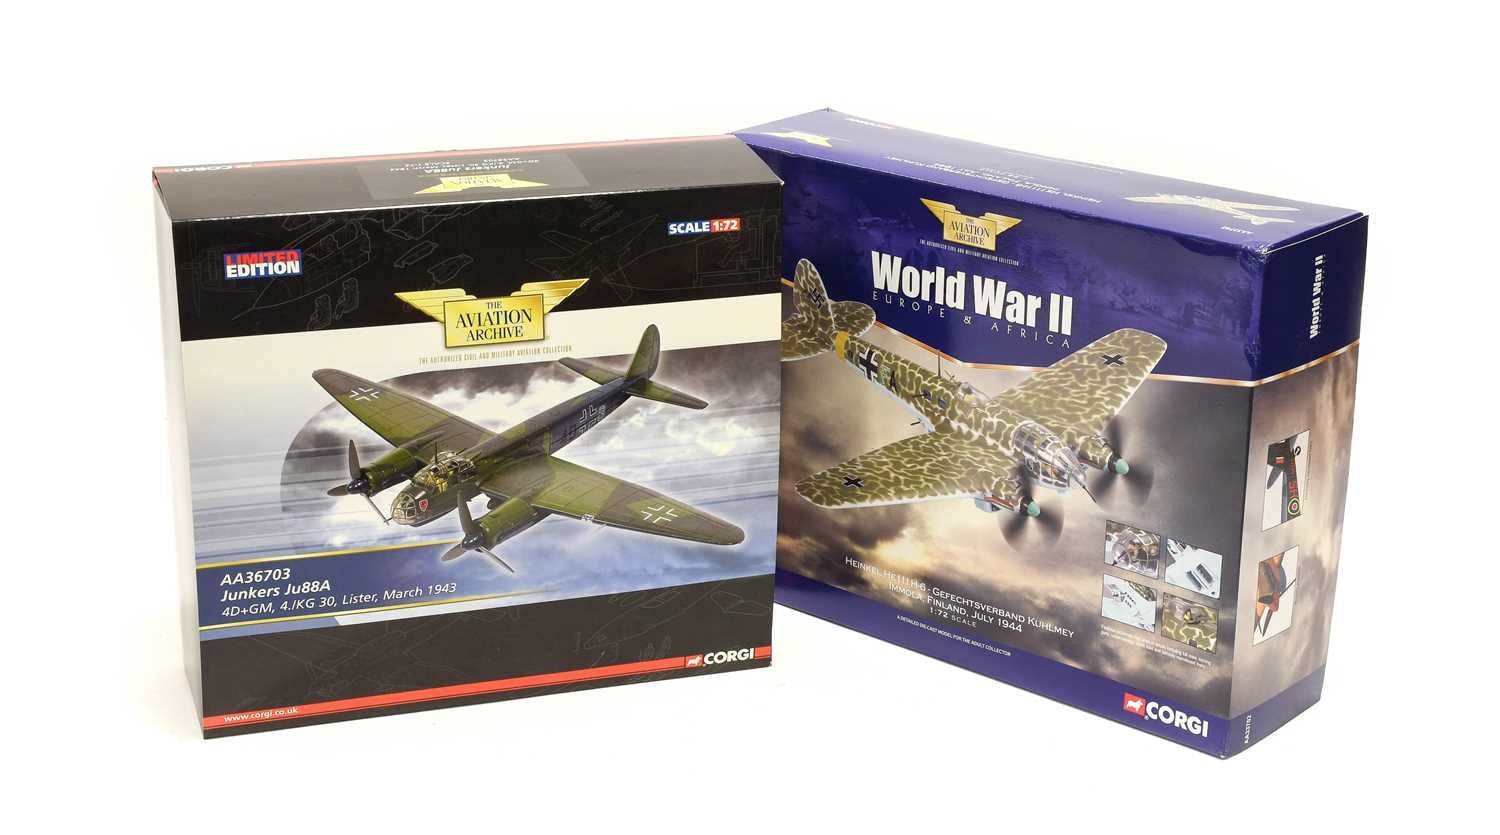 Corgi Aviation Archive 1:72 Scale Two WWII German Bombers